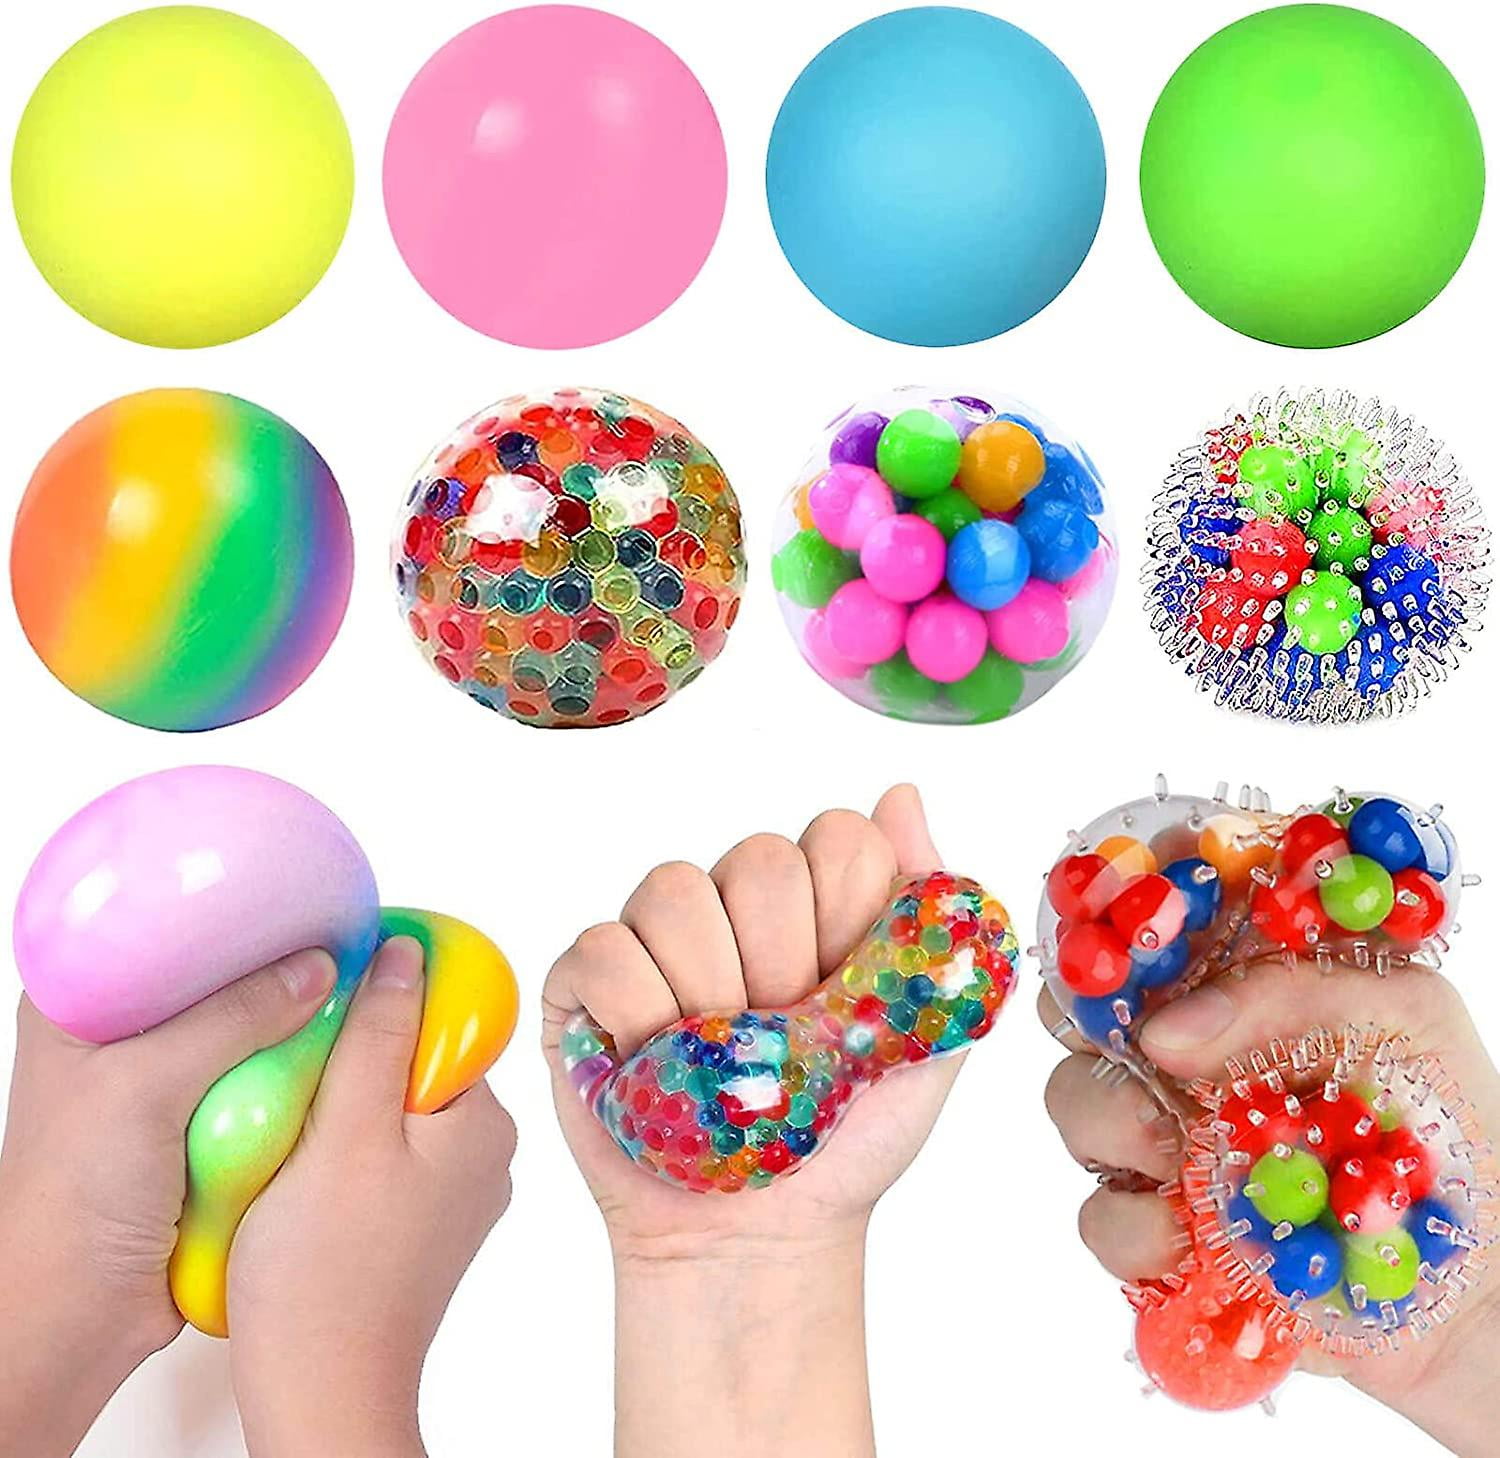 Glow in The Dark Sticky Ceiling Balls,Stress Balls for Adults and Kids,Glow Sticks Balls,Squishy Toys for Kids,Figit Toys,Sensory Toys,Stress Toys,Gifts for Adults and Kids 8Pcs 